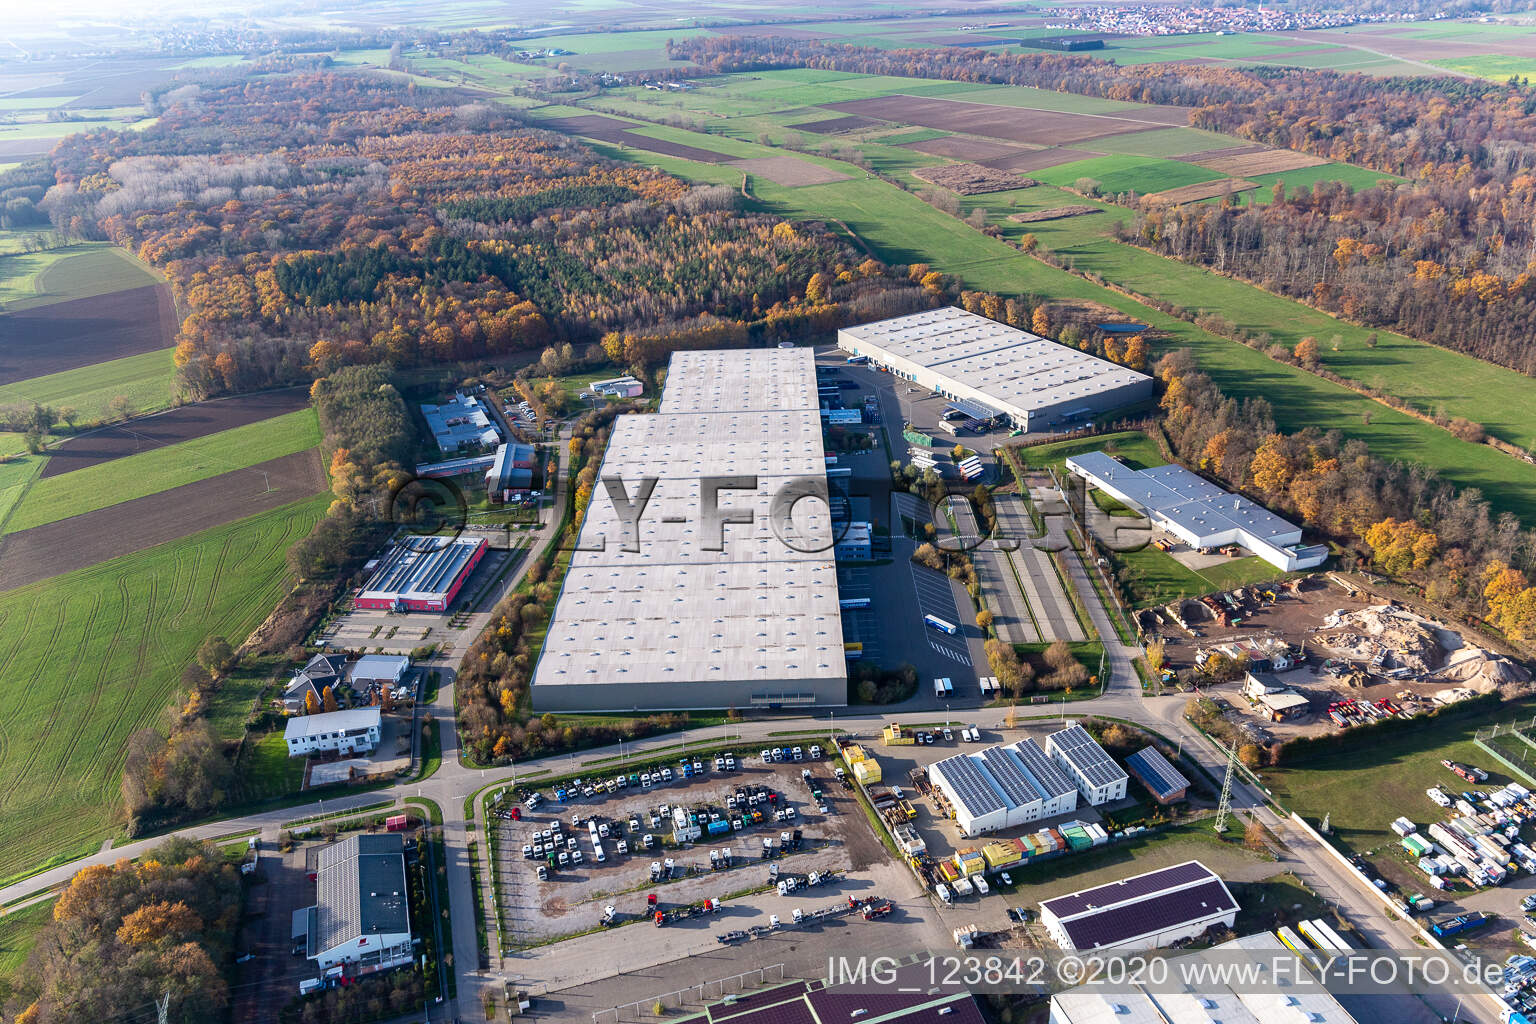 Horst commercial area with Magna Exteriors, Random Logistics, STS Group and Thermo Fisher in the district Minderslachen in Kandel in the state Rhineland-Palatinate, Germany from above